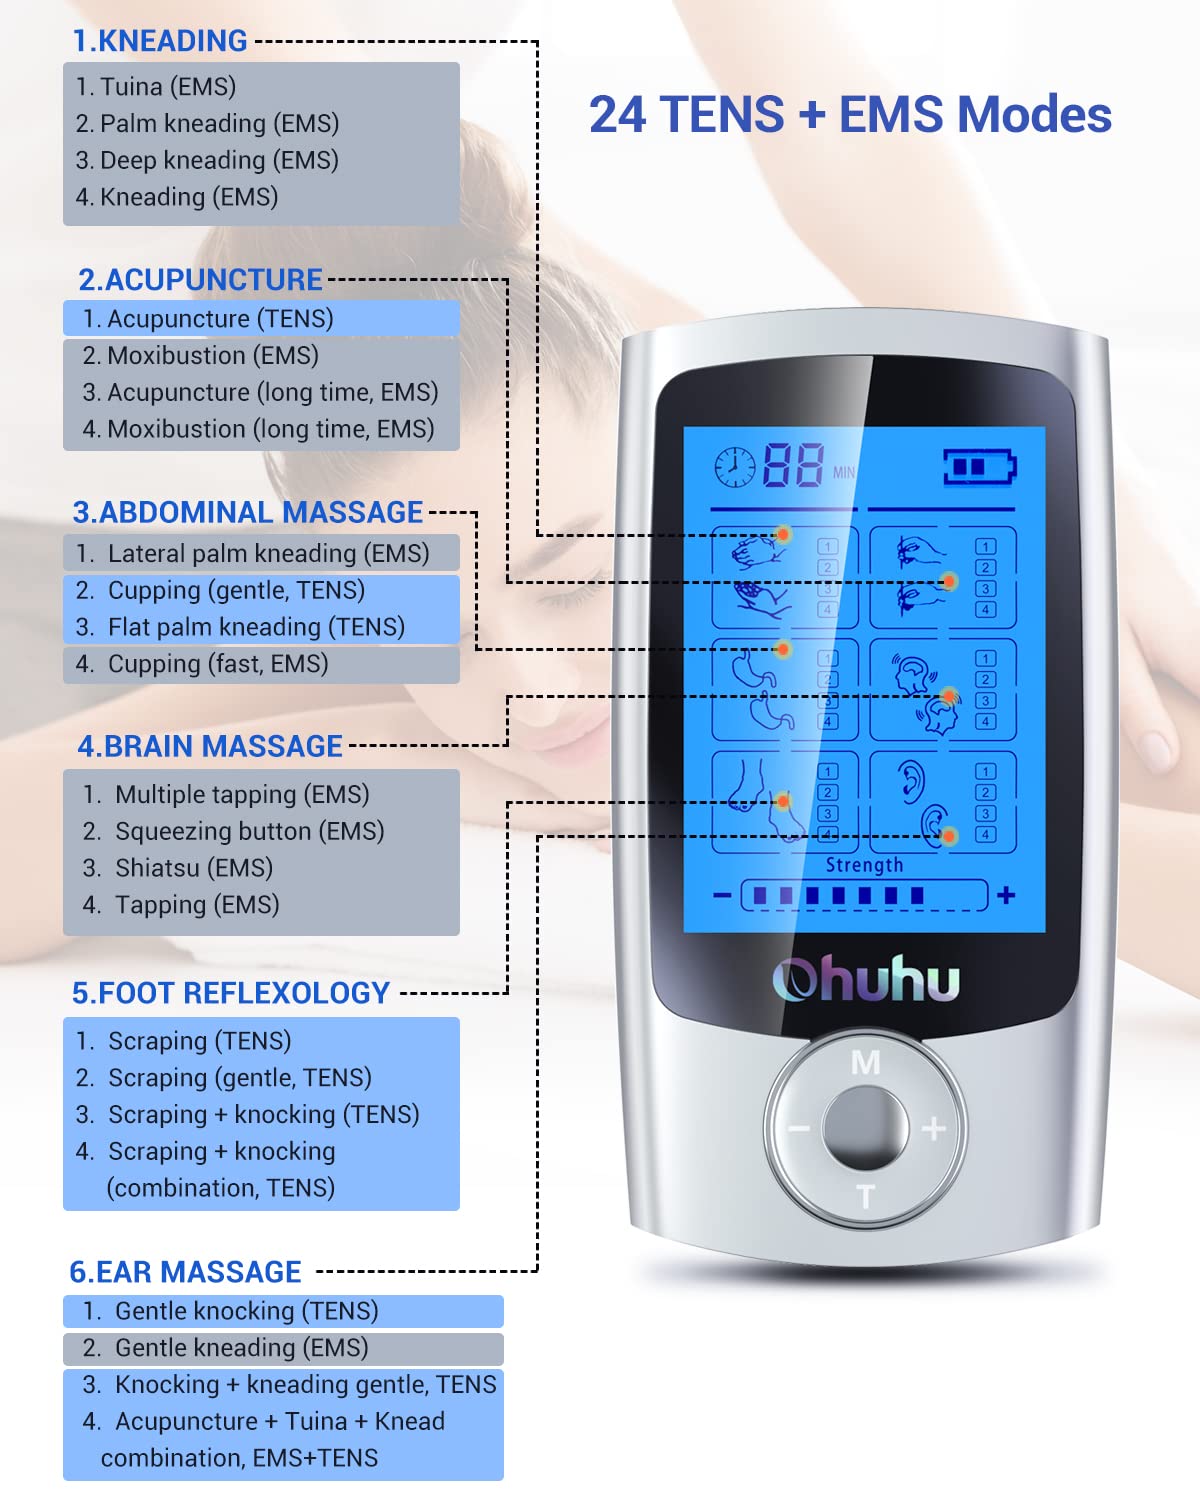 Ohuhu Tens Unit Muscle Stimulator: 24 Modes Rechargeable Tens Stimulator Machine - 16 Pads Electric EMS Unit Massager Acupoint Map Included for Back Shoulder Legs Pain Relief Gift - Silver